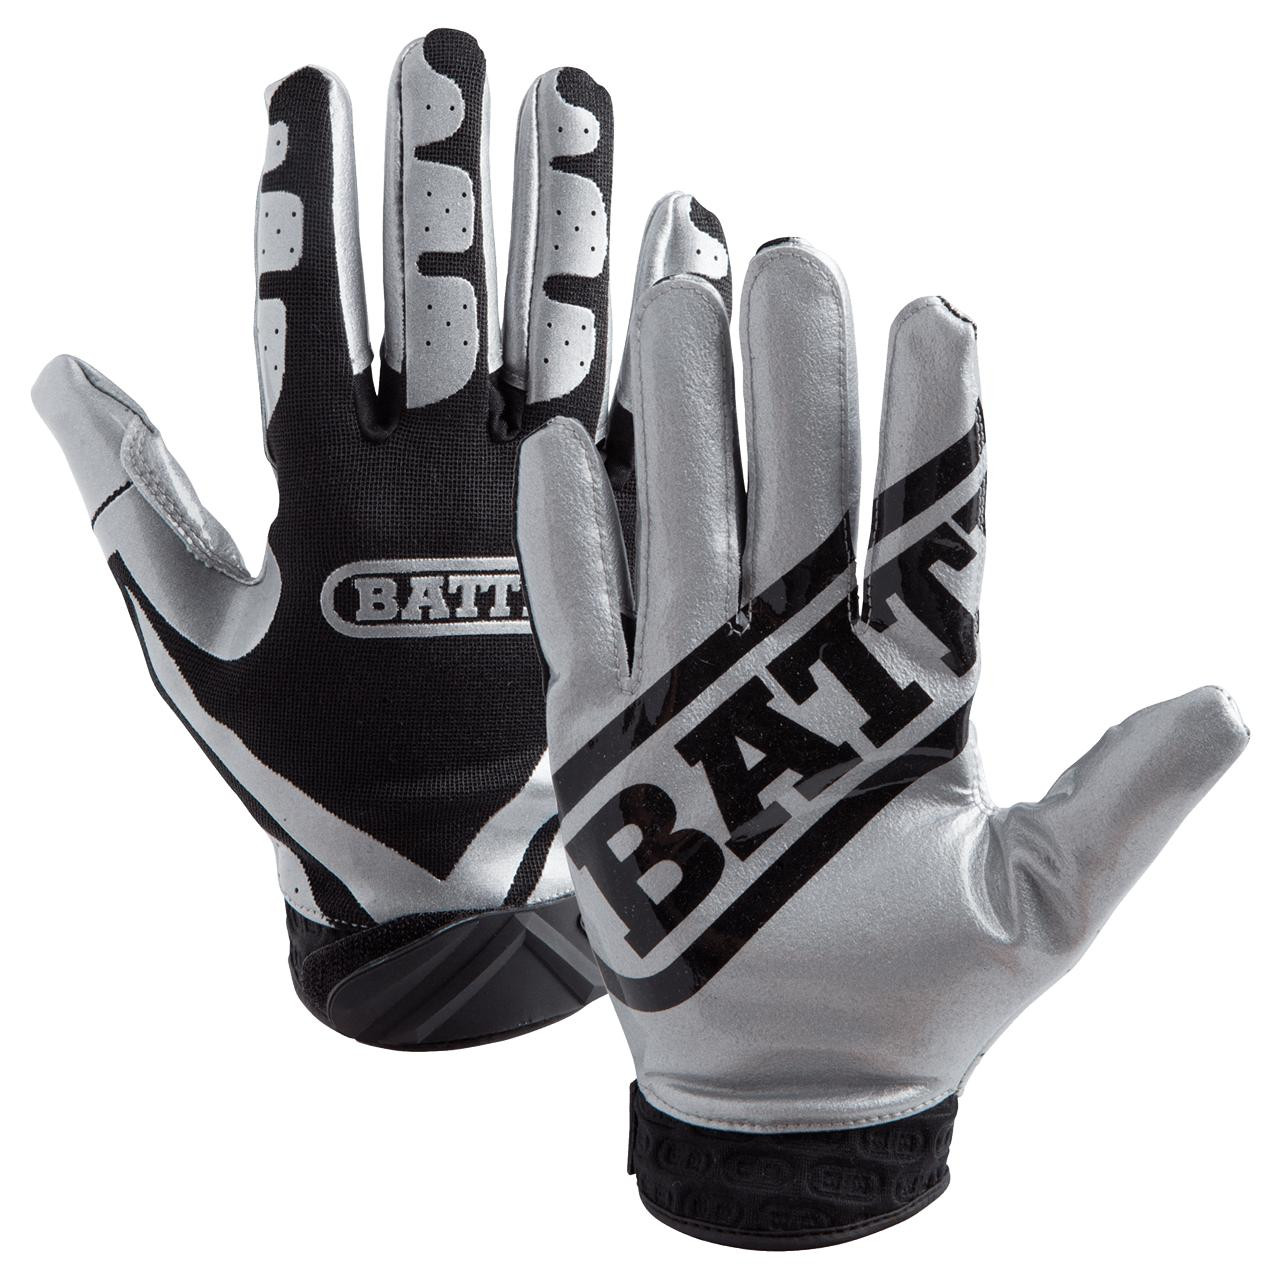 Ultra-Stick Receiver Football Gloves - Adult & Youth